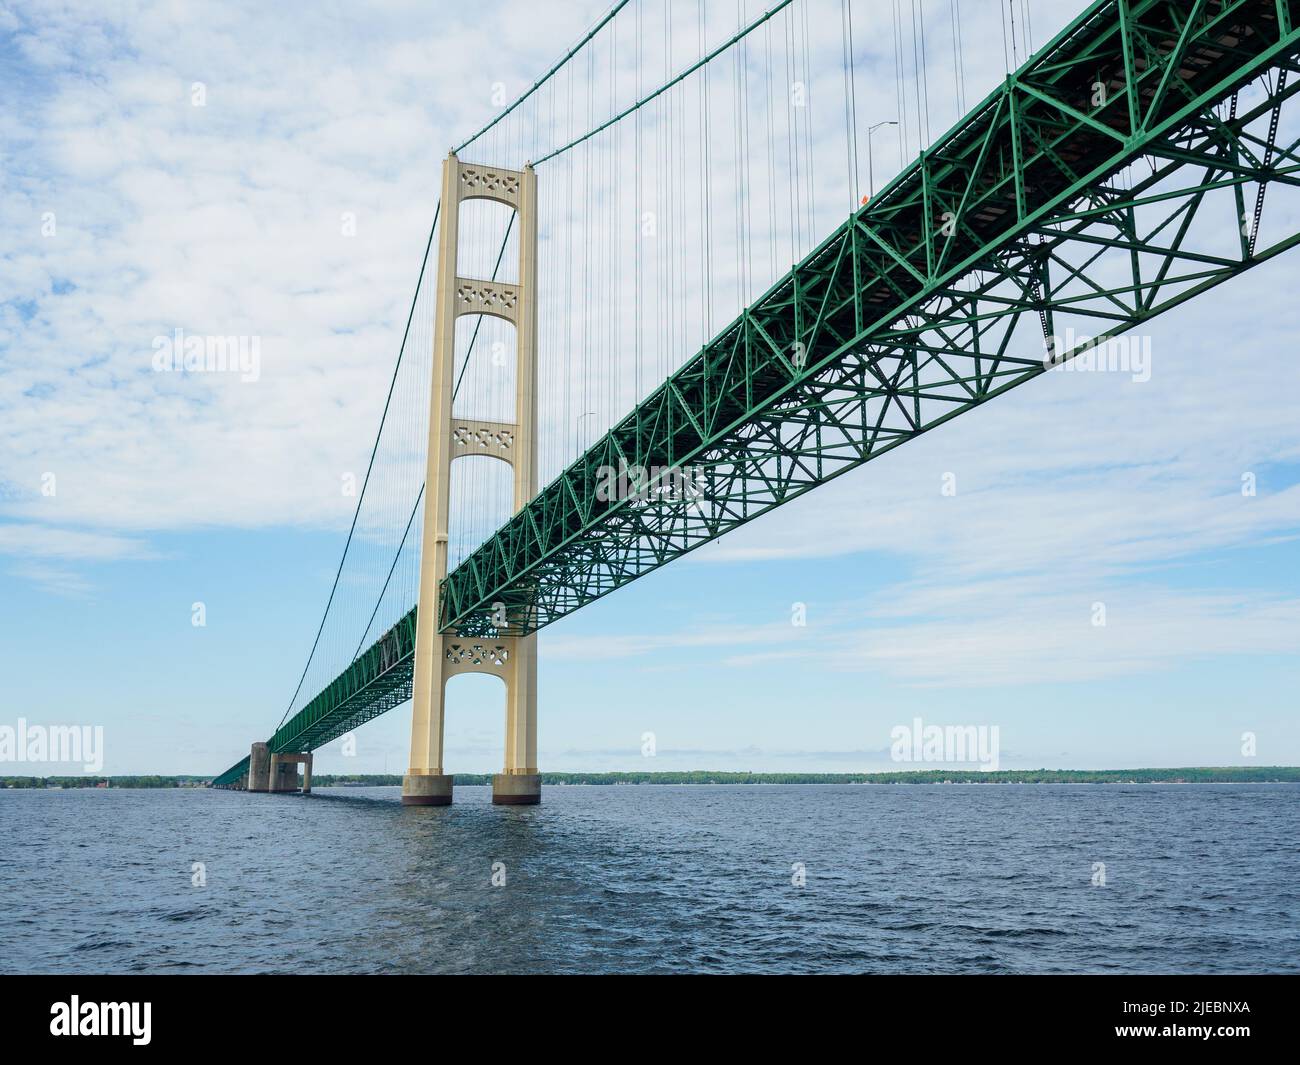 Mackinac Bridge connects the Lower and Upper peninsulas of the Michigan State Stock Photo